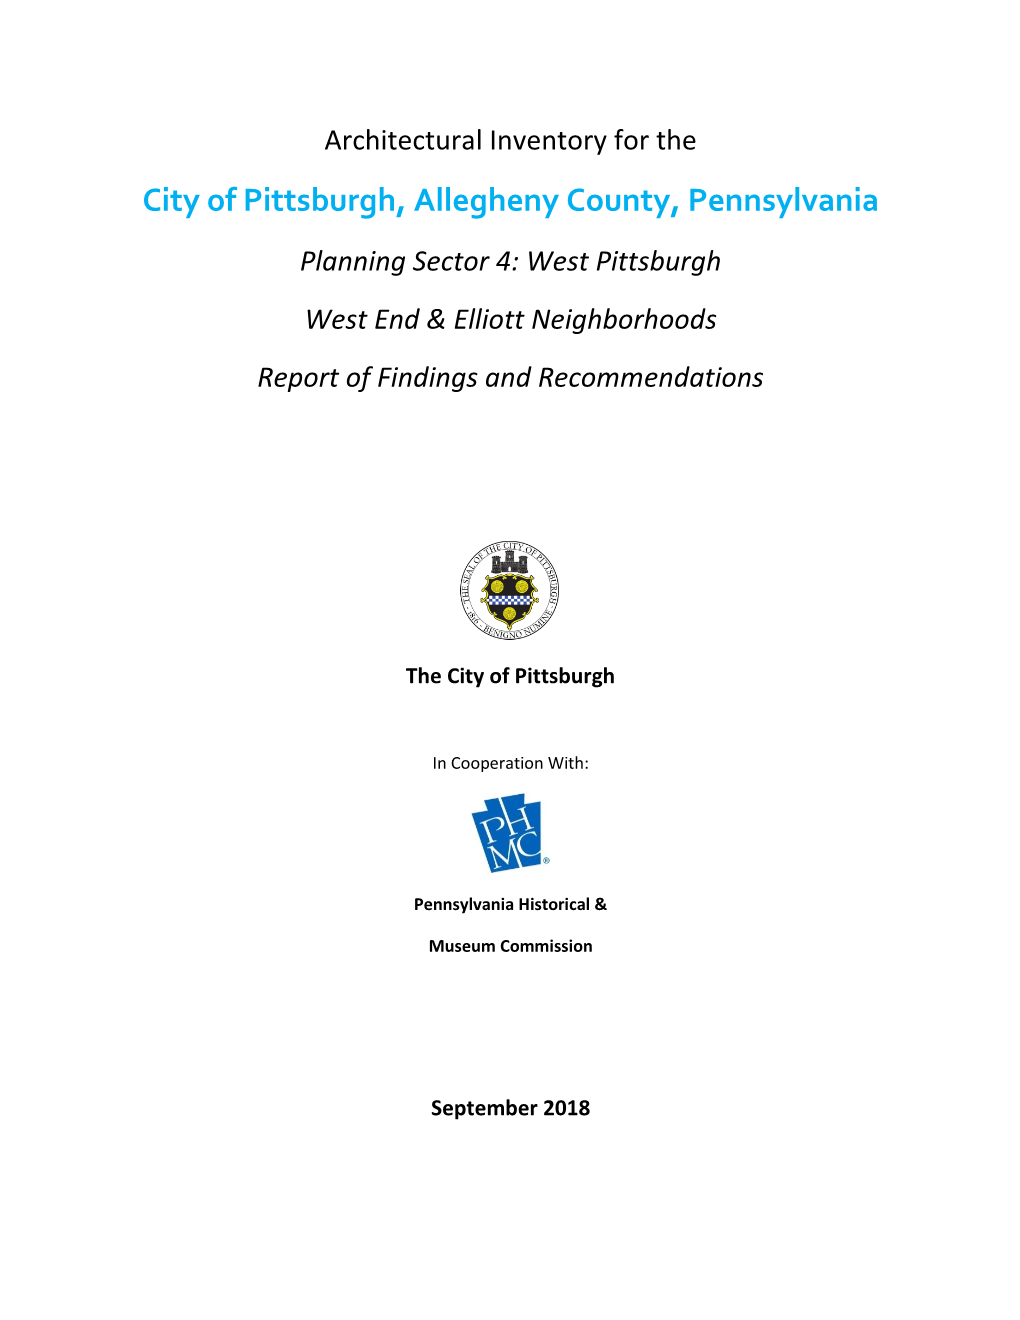 City of Pittsburgh, Allegheny County, Pennsylvania Planning Sector 4: West Pittsburgh West End & Elliott Neighborhoods Report of Findings and Recommendations